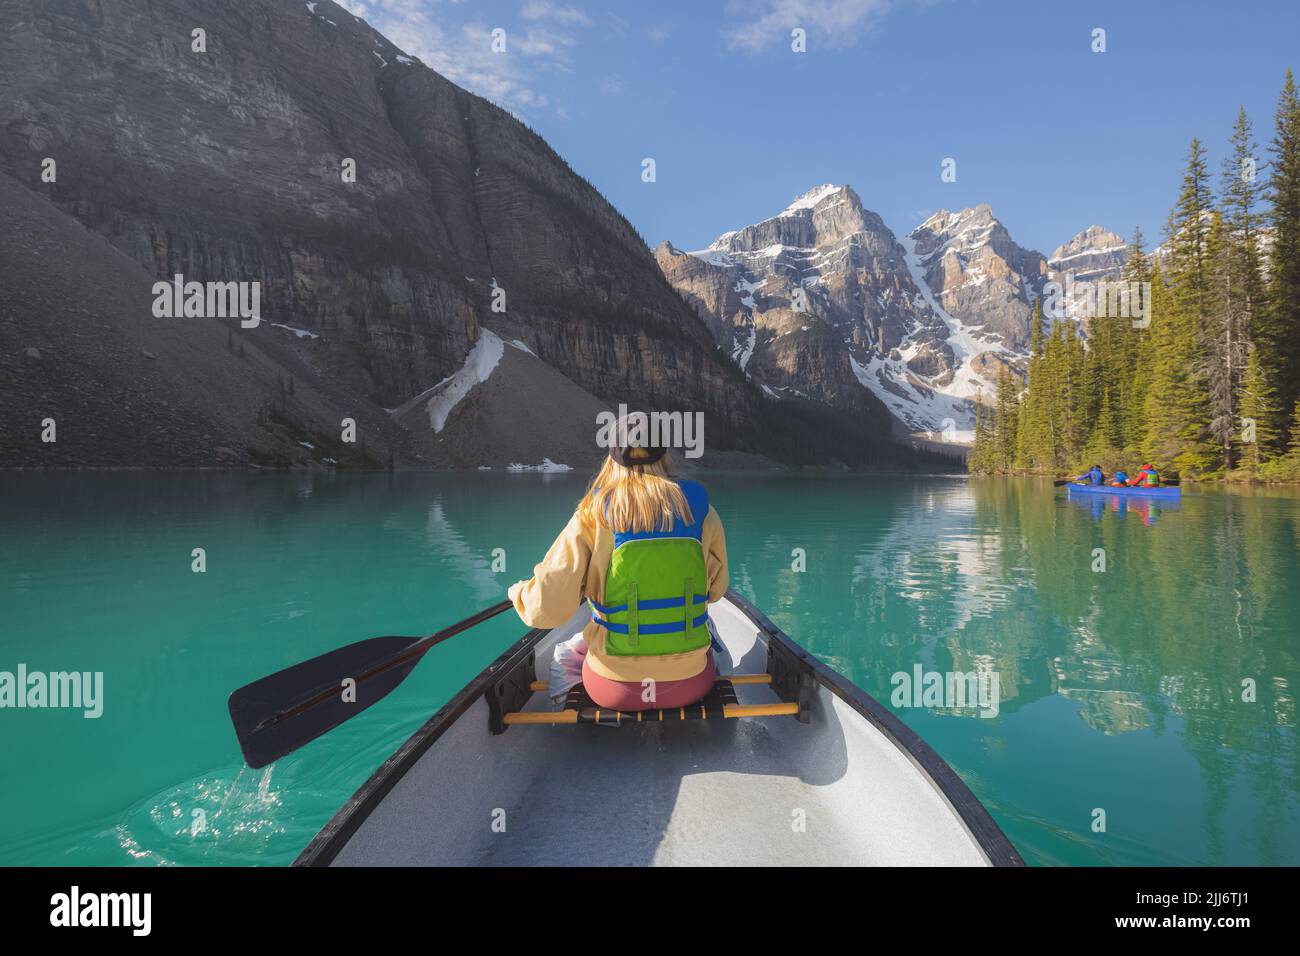 A young blonde woman paddles a canoe on the scenic, picturesque glacial Moraine Lake, a popular outdoor tourist destination in Banff National Park, Al Stock Photo